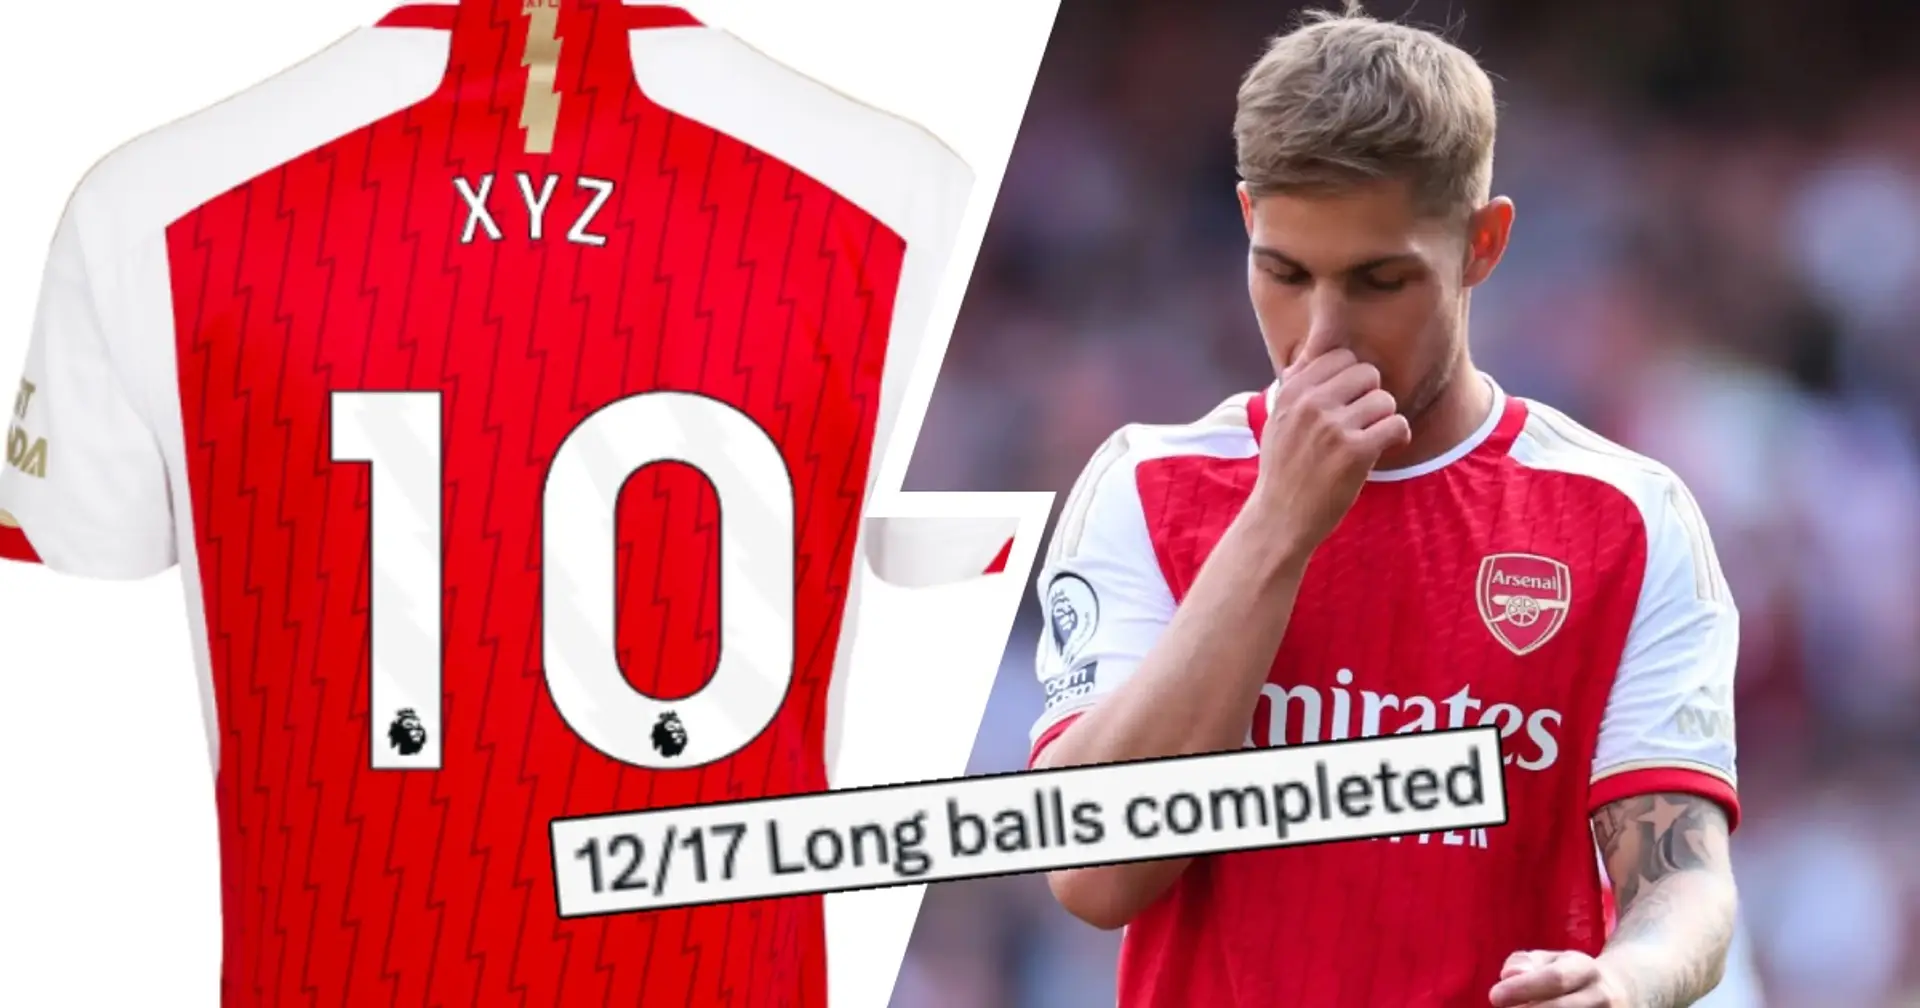 Arsenal fans joke about player taking over Smith Rowe's jersey no. 10